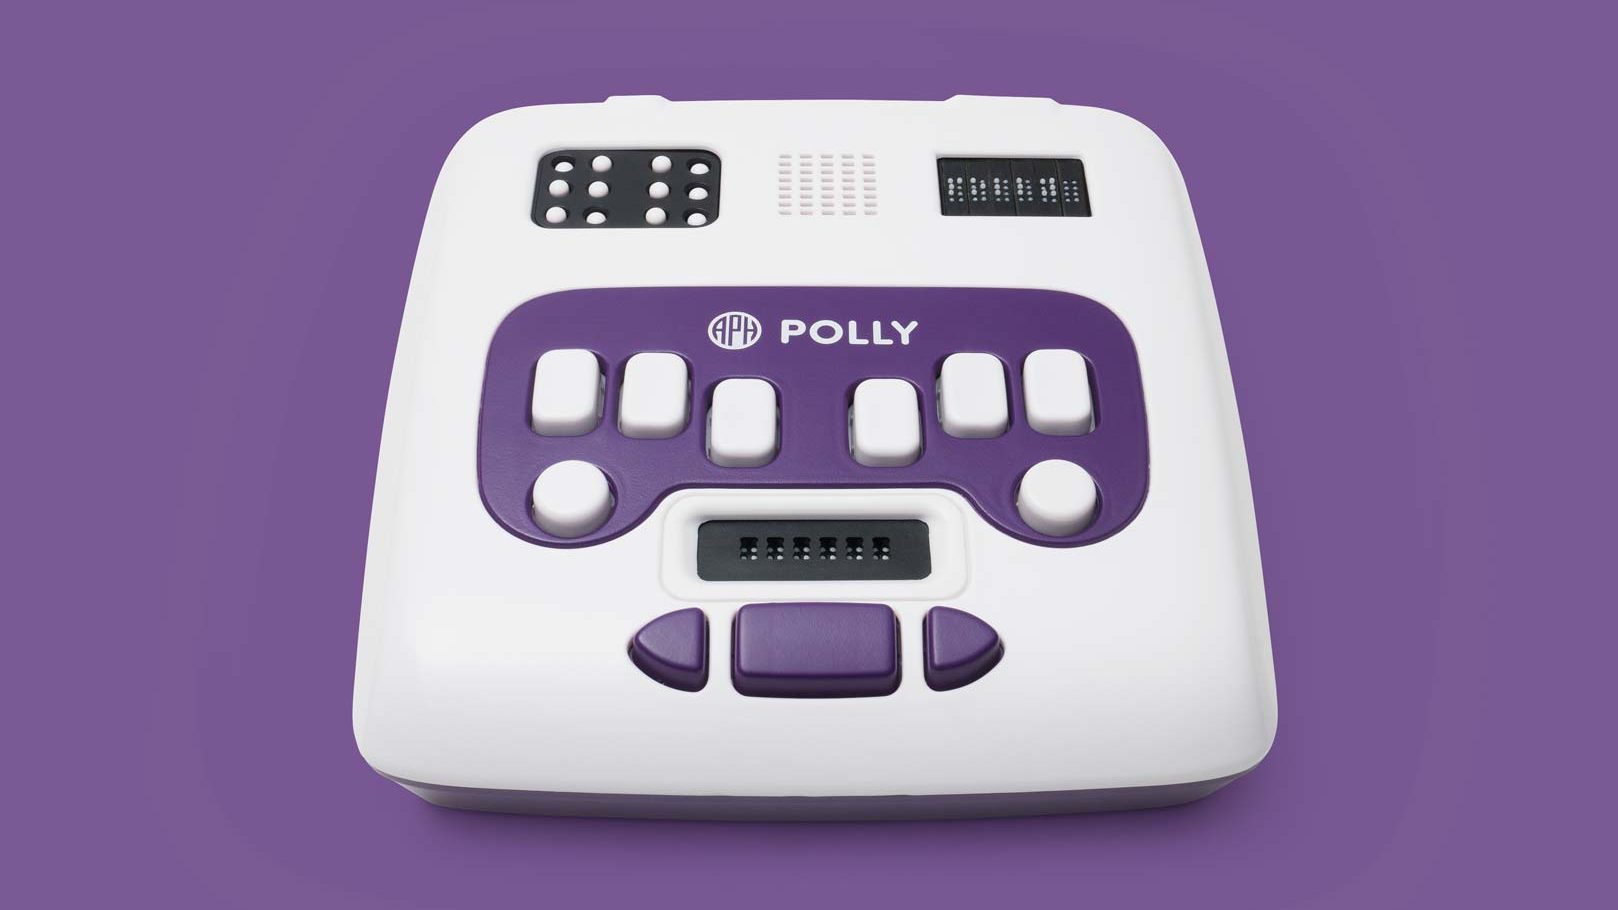 Overhead view of Polly showing large and standard braille cells, Perkins-style keyboard, electronic slate, and navigation keys.